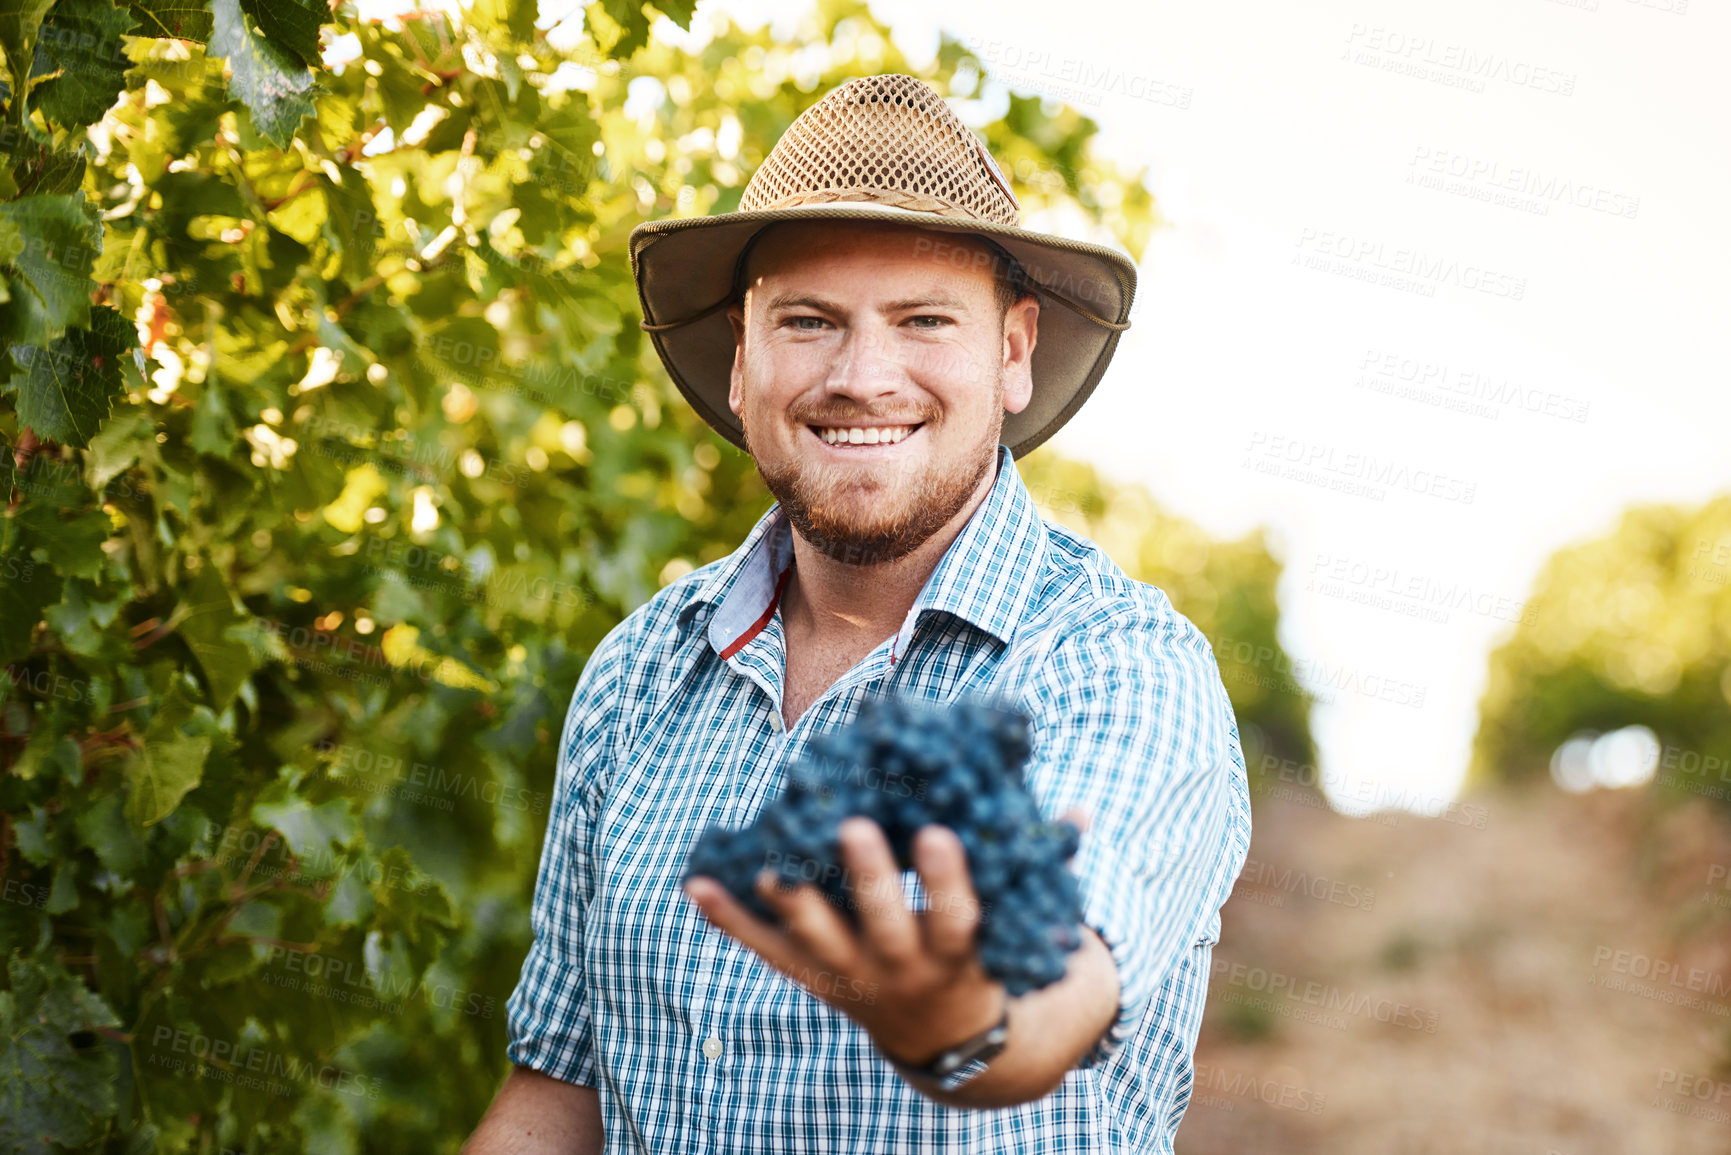 Buy stock photo Portrait of a farmer holding a bunch of grapes in a vineyard